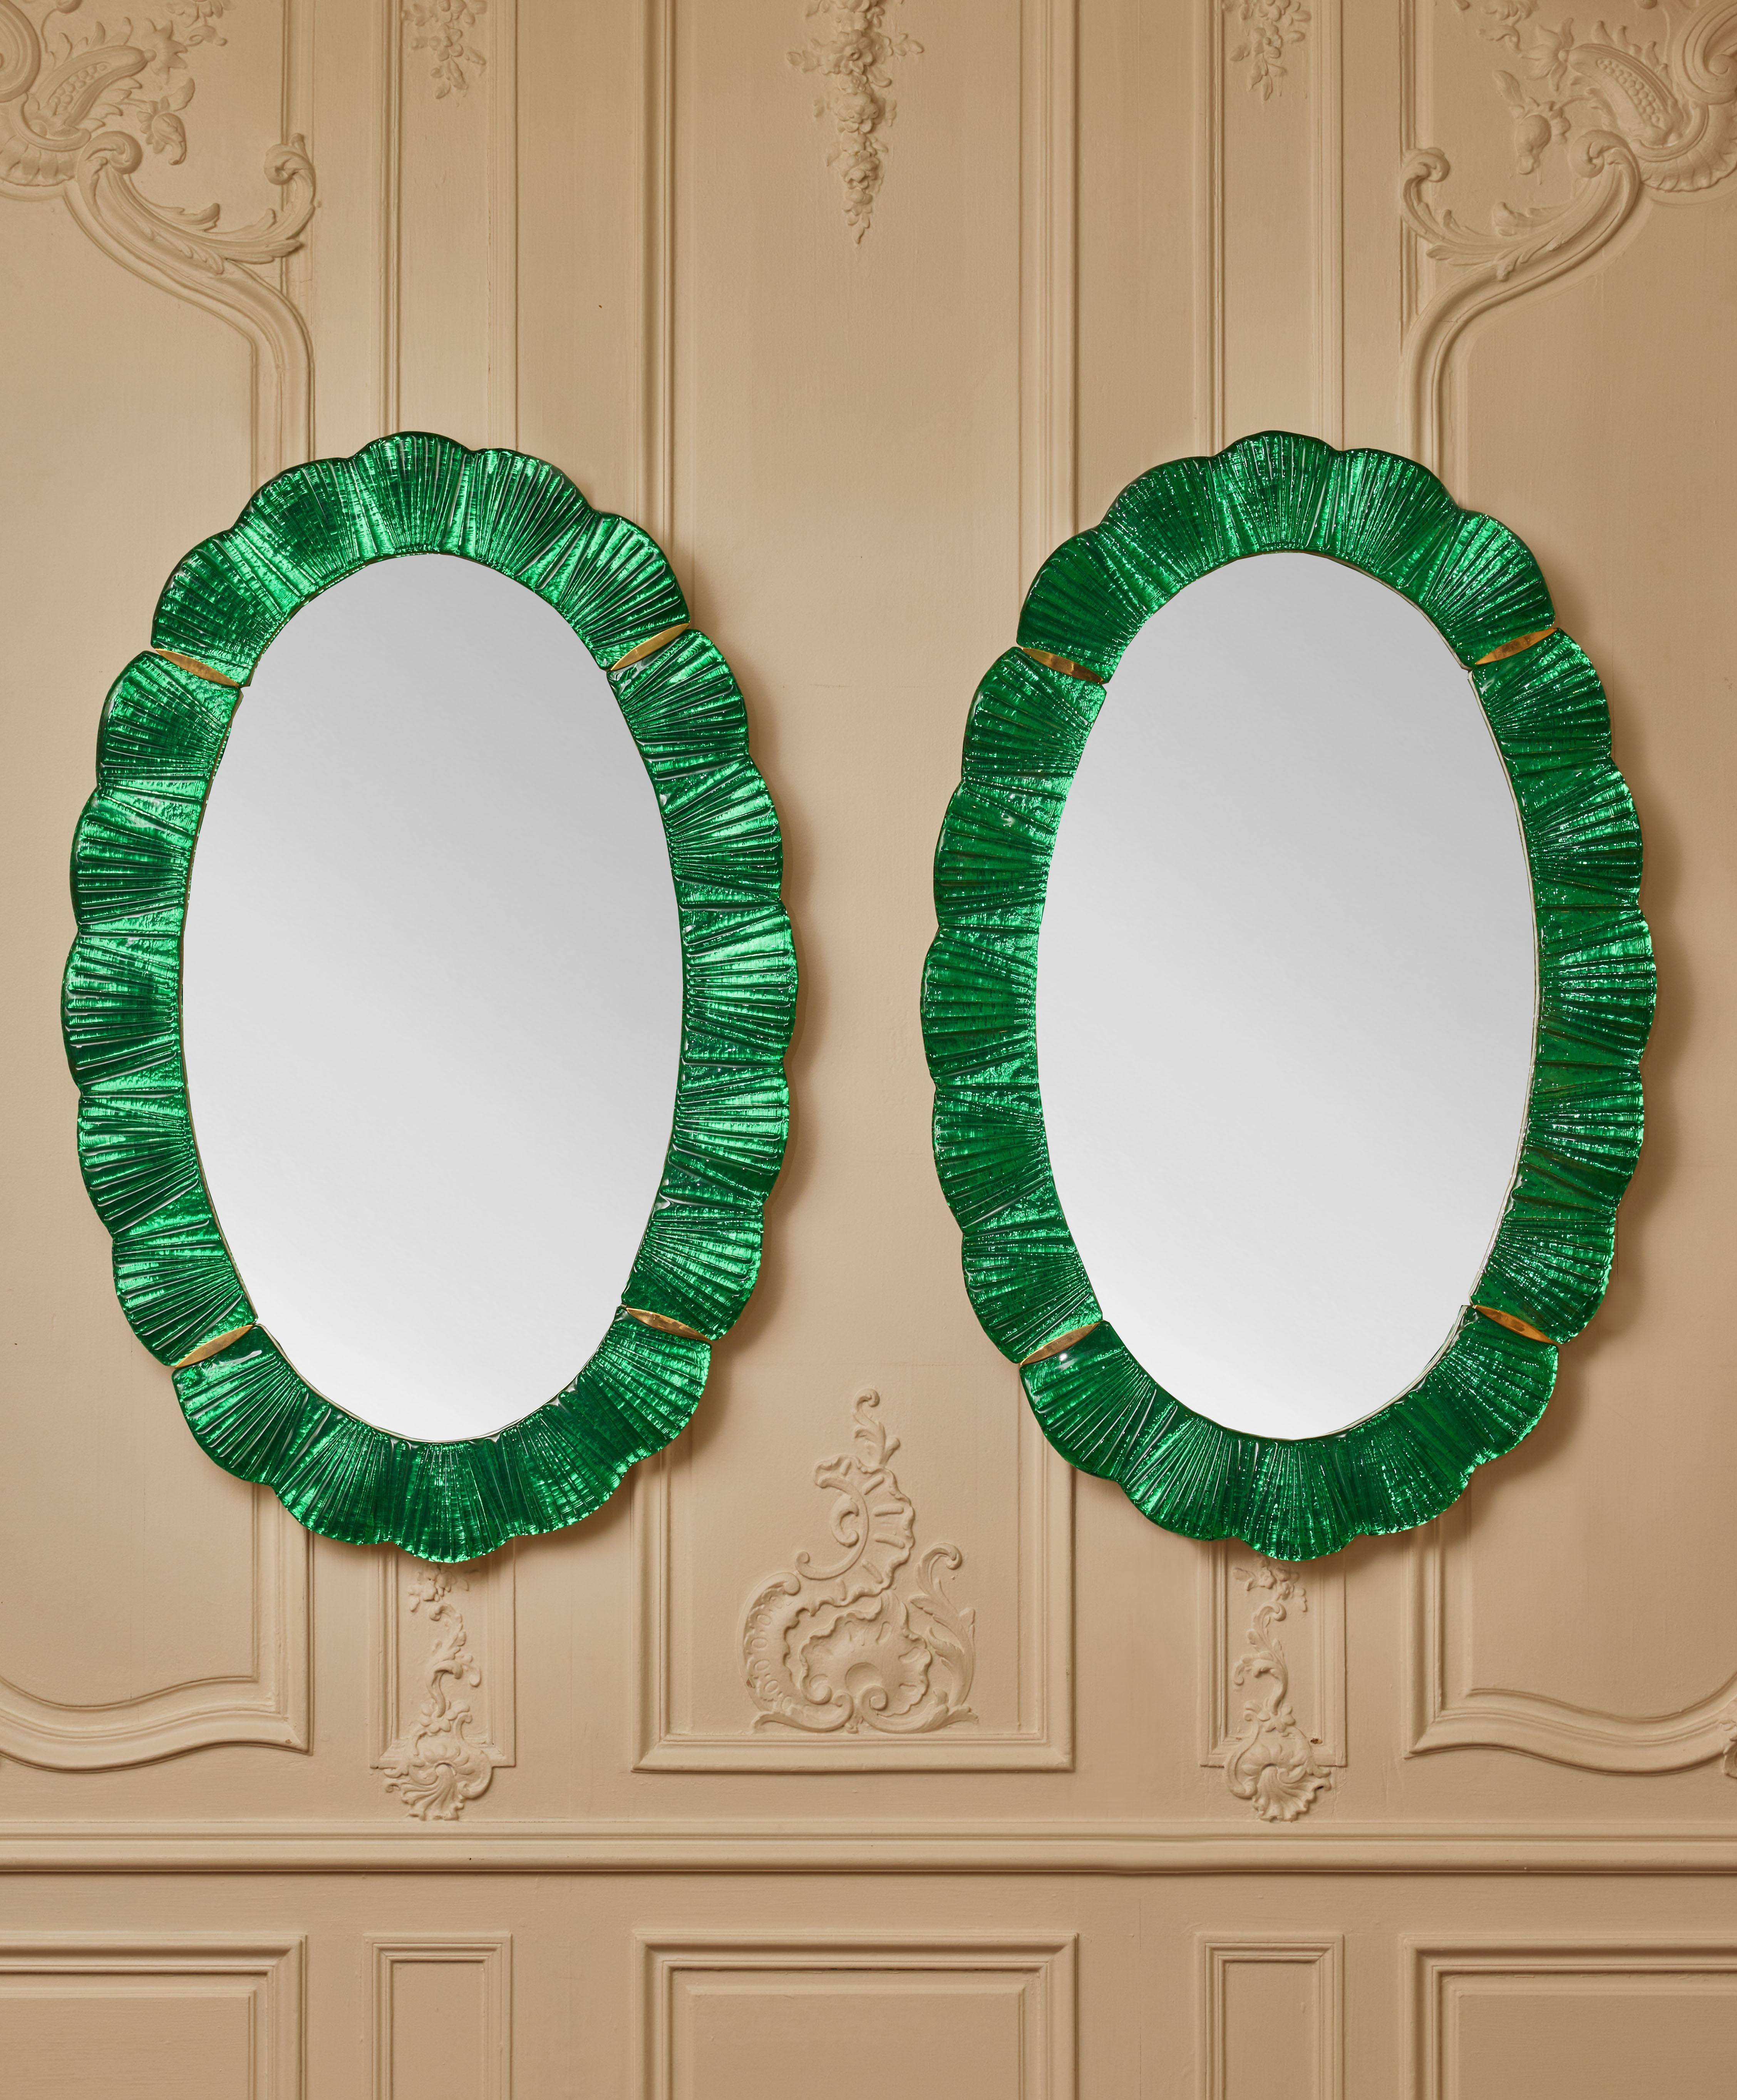 Pair of oval mirrors with frame in sculpted Murano glass and brass inlays.
Creation by Studio Glustin.